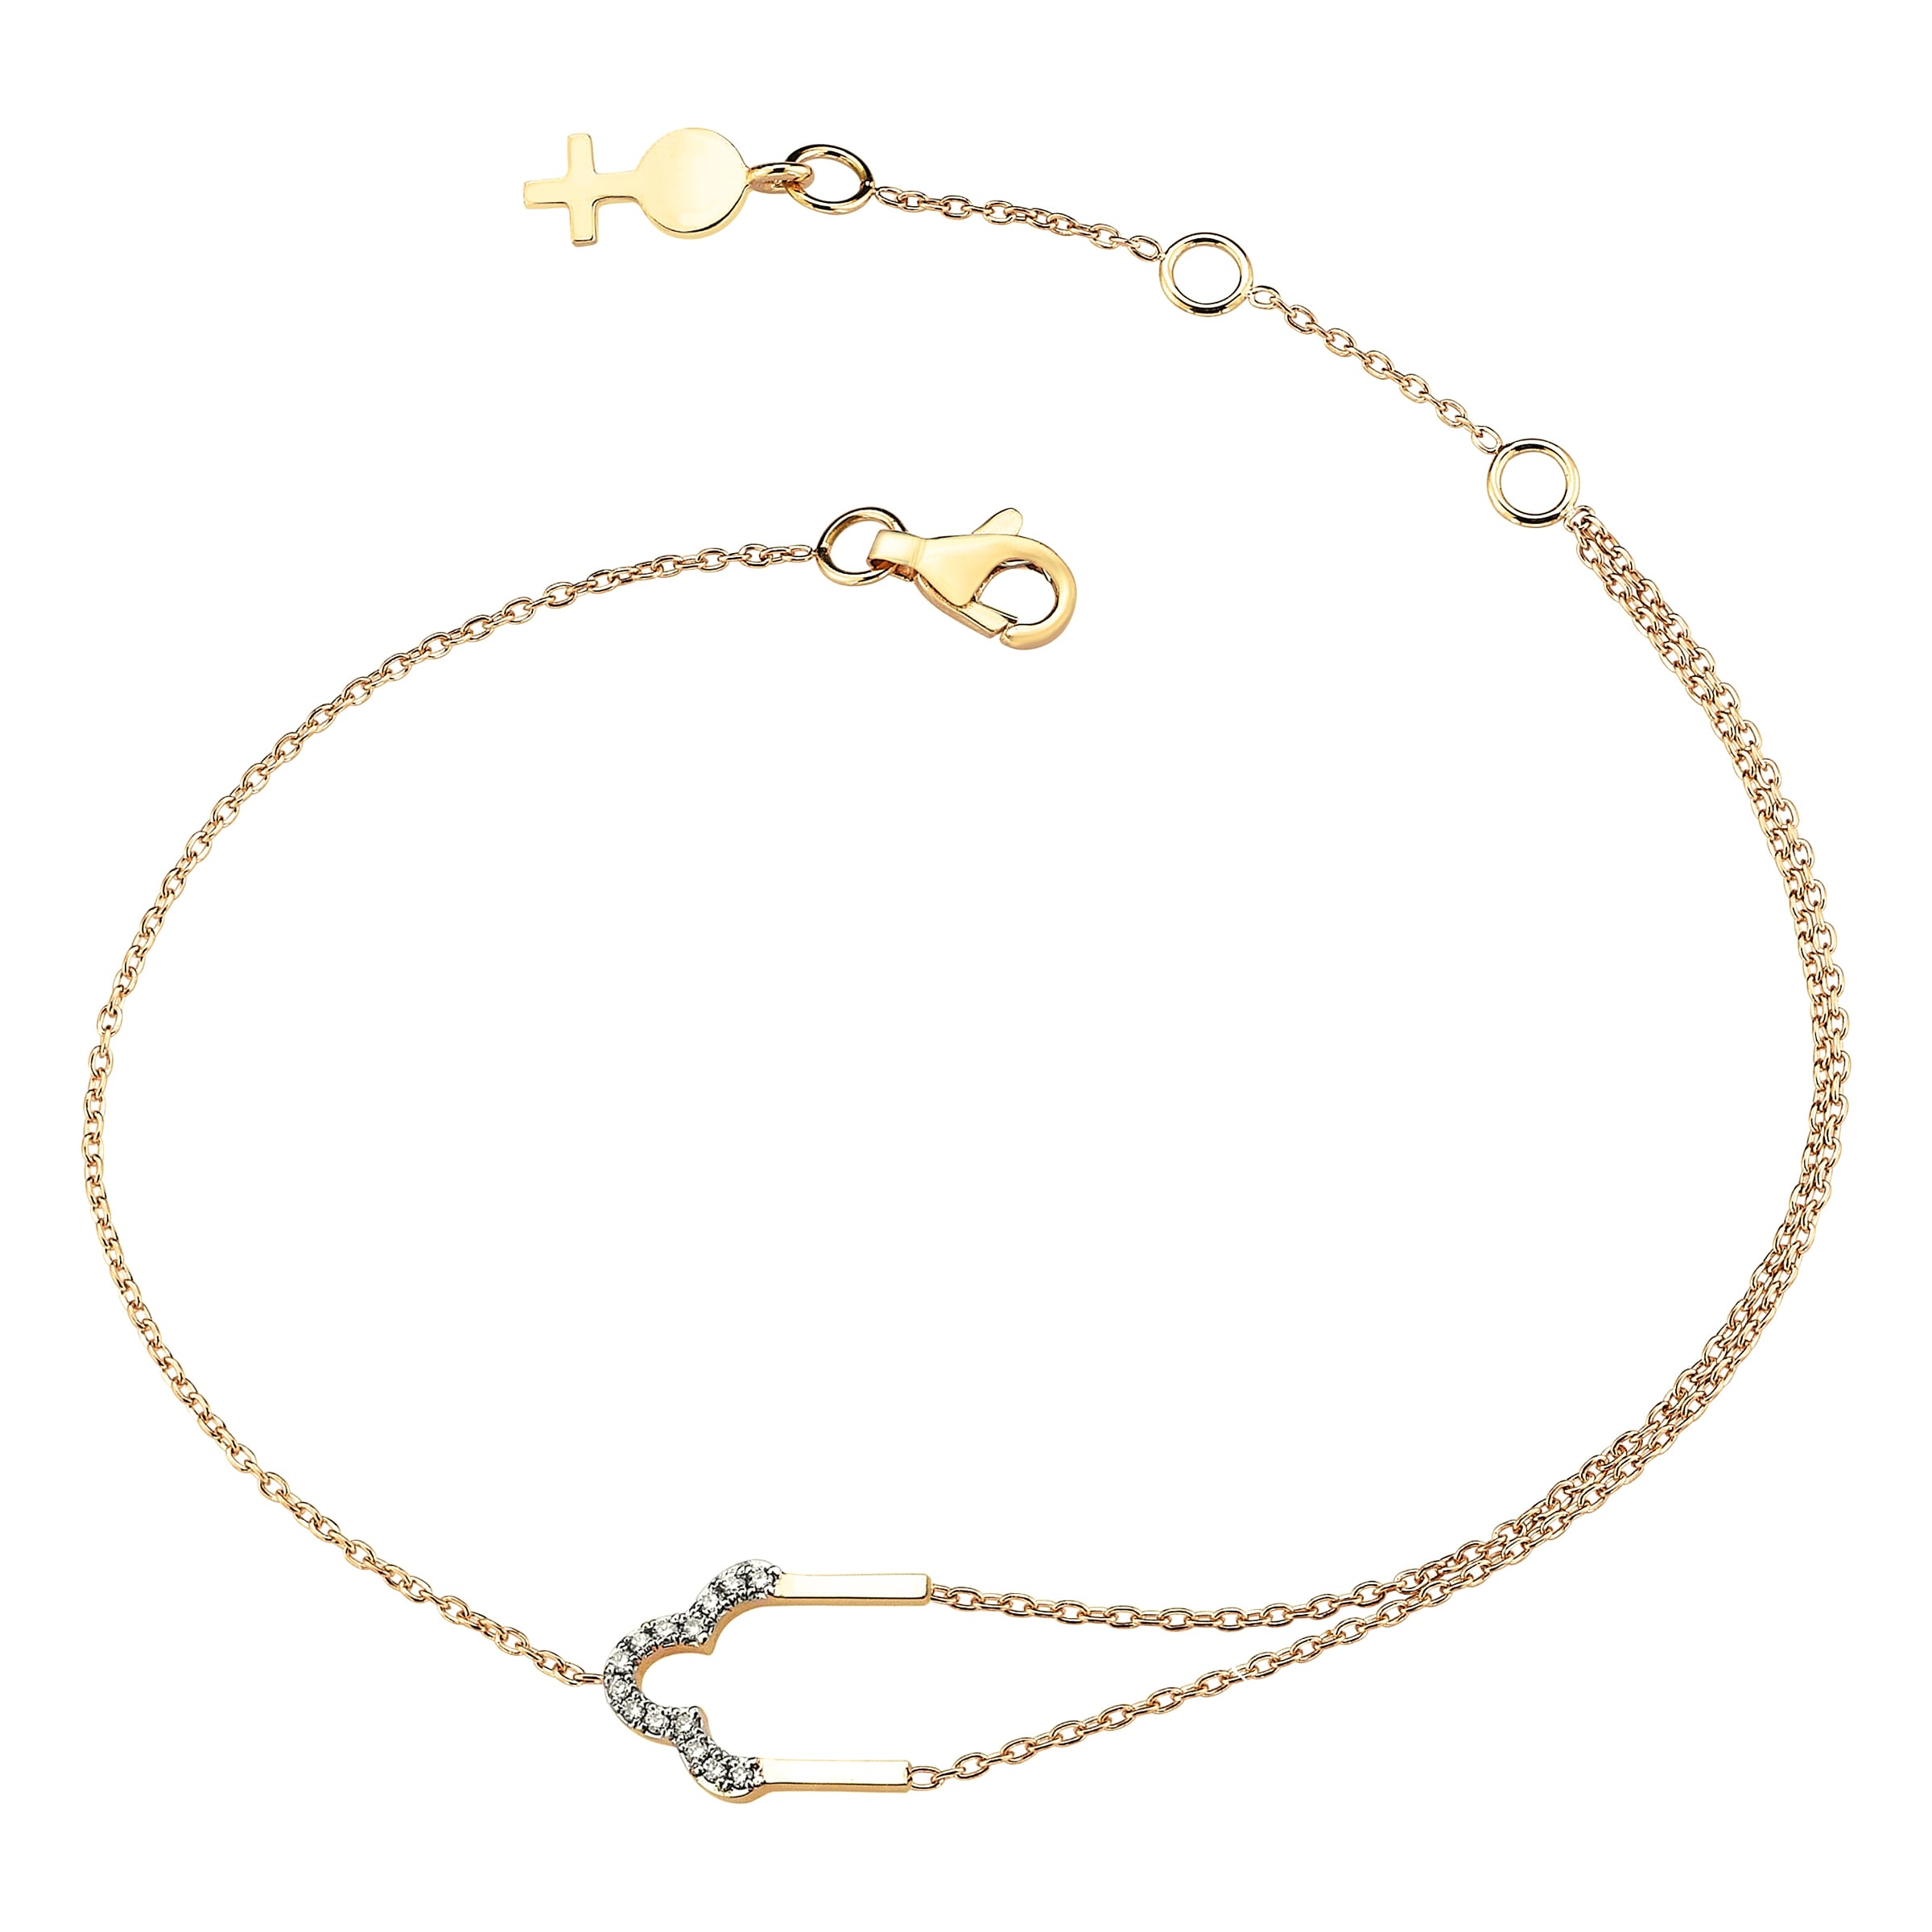 Round Trefoil Anklet in Yellow Gold - Her Story Shop